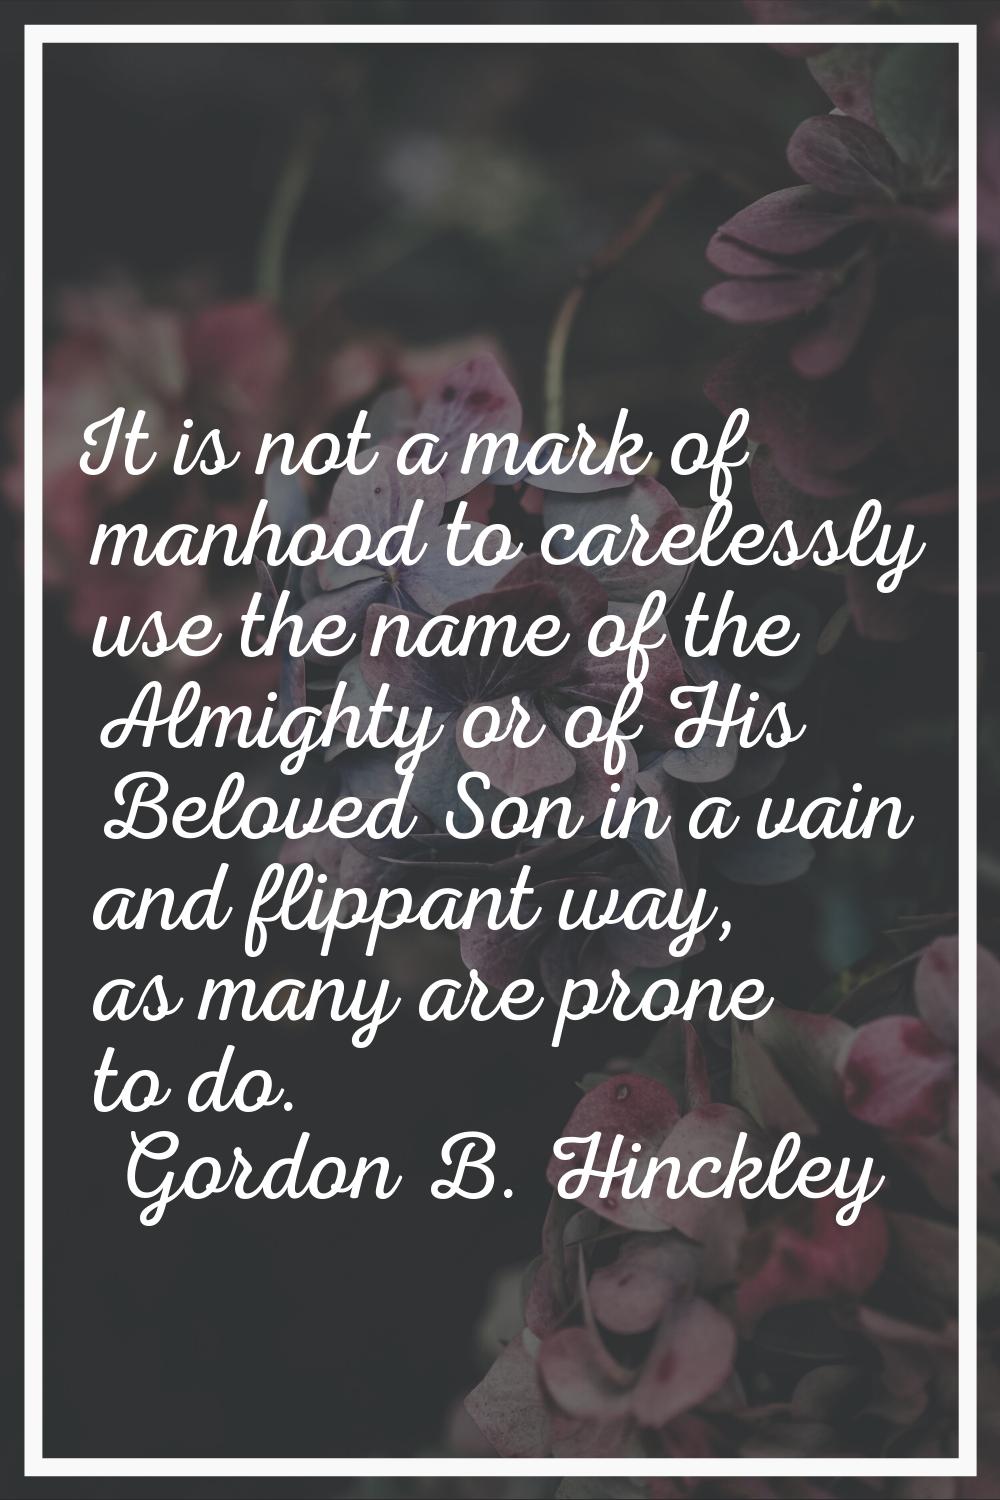 It is not a mark of manhood to carelessly use the name of the Almighty or of His Beloved Son in a v